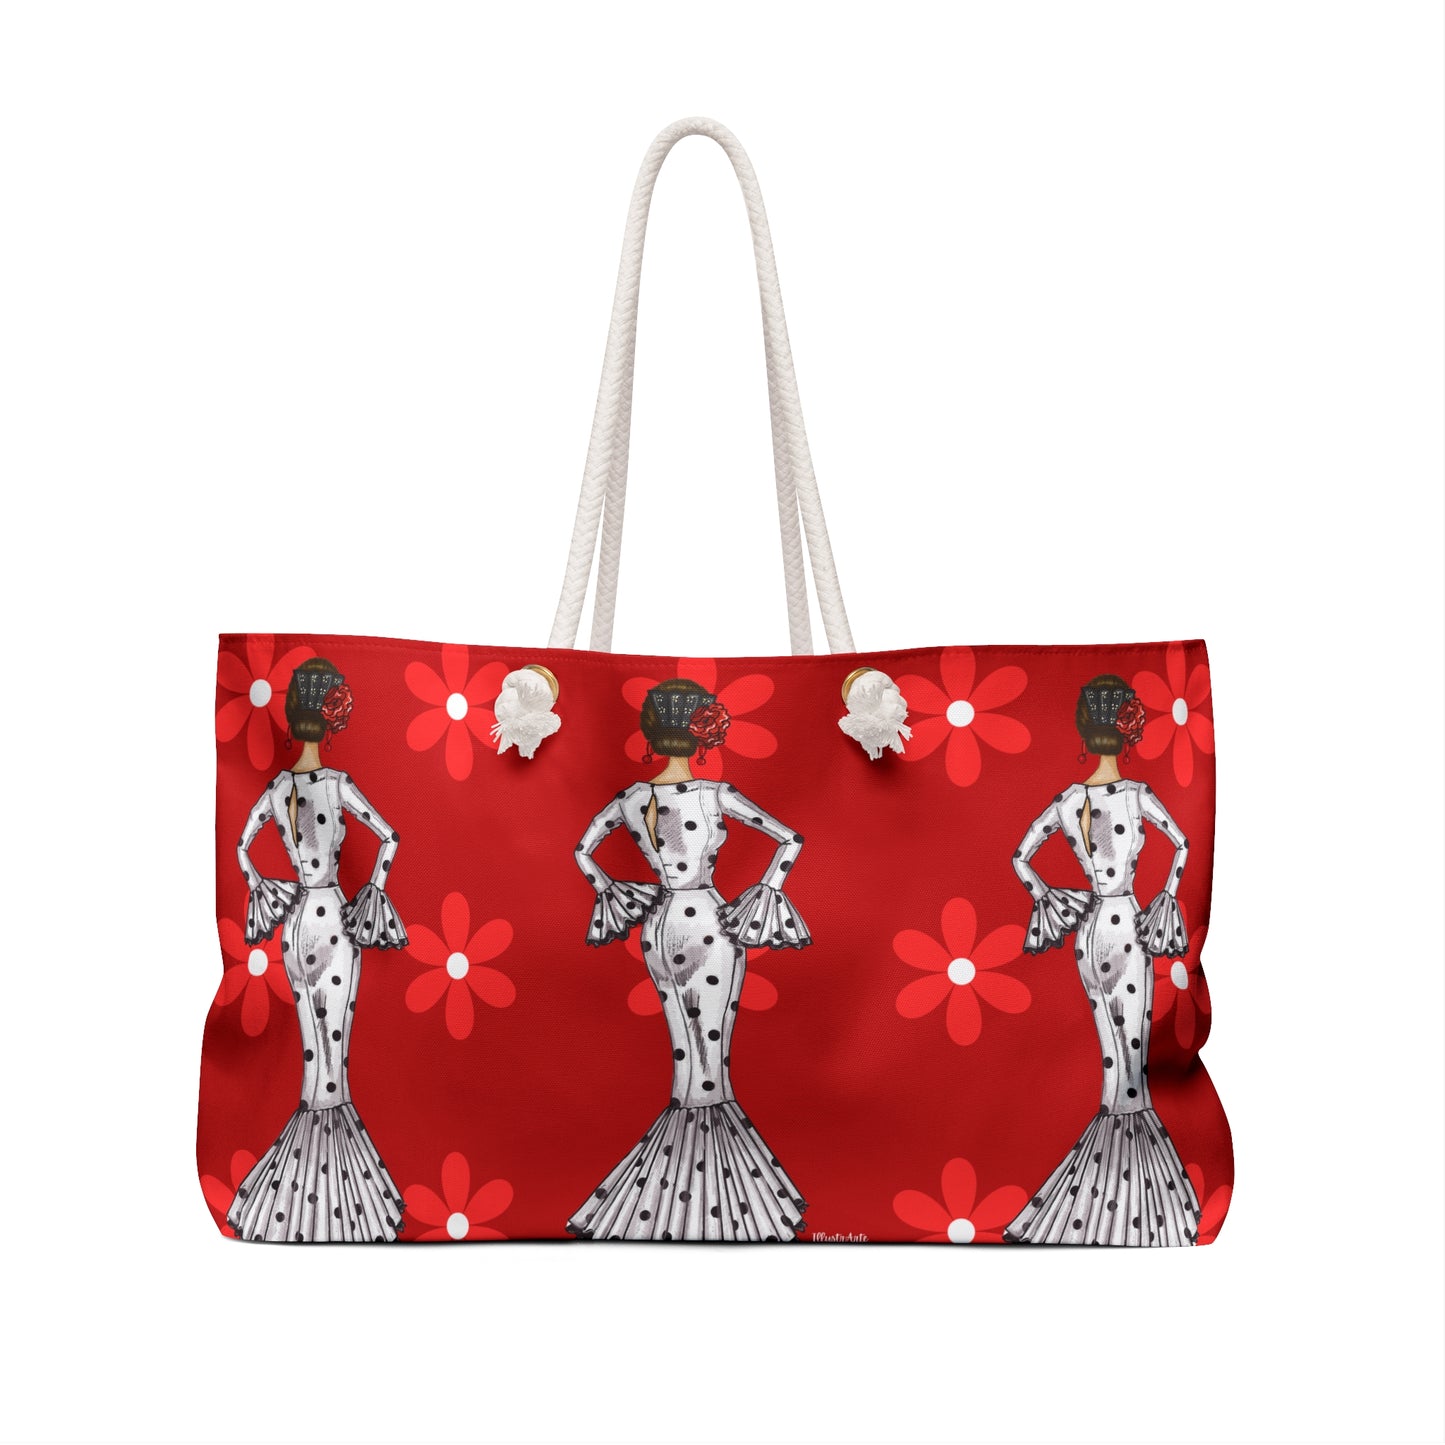 Flamenco Lovers Weekender Bag - Customizable, Oversized,Our flamenco dancer  Maria with red flowers.